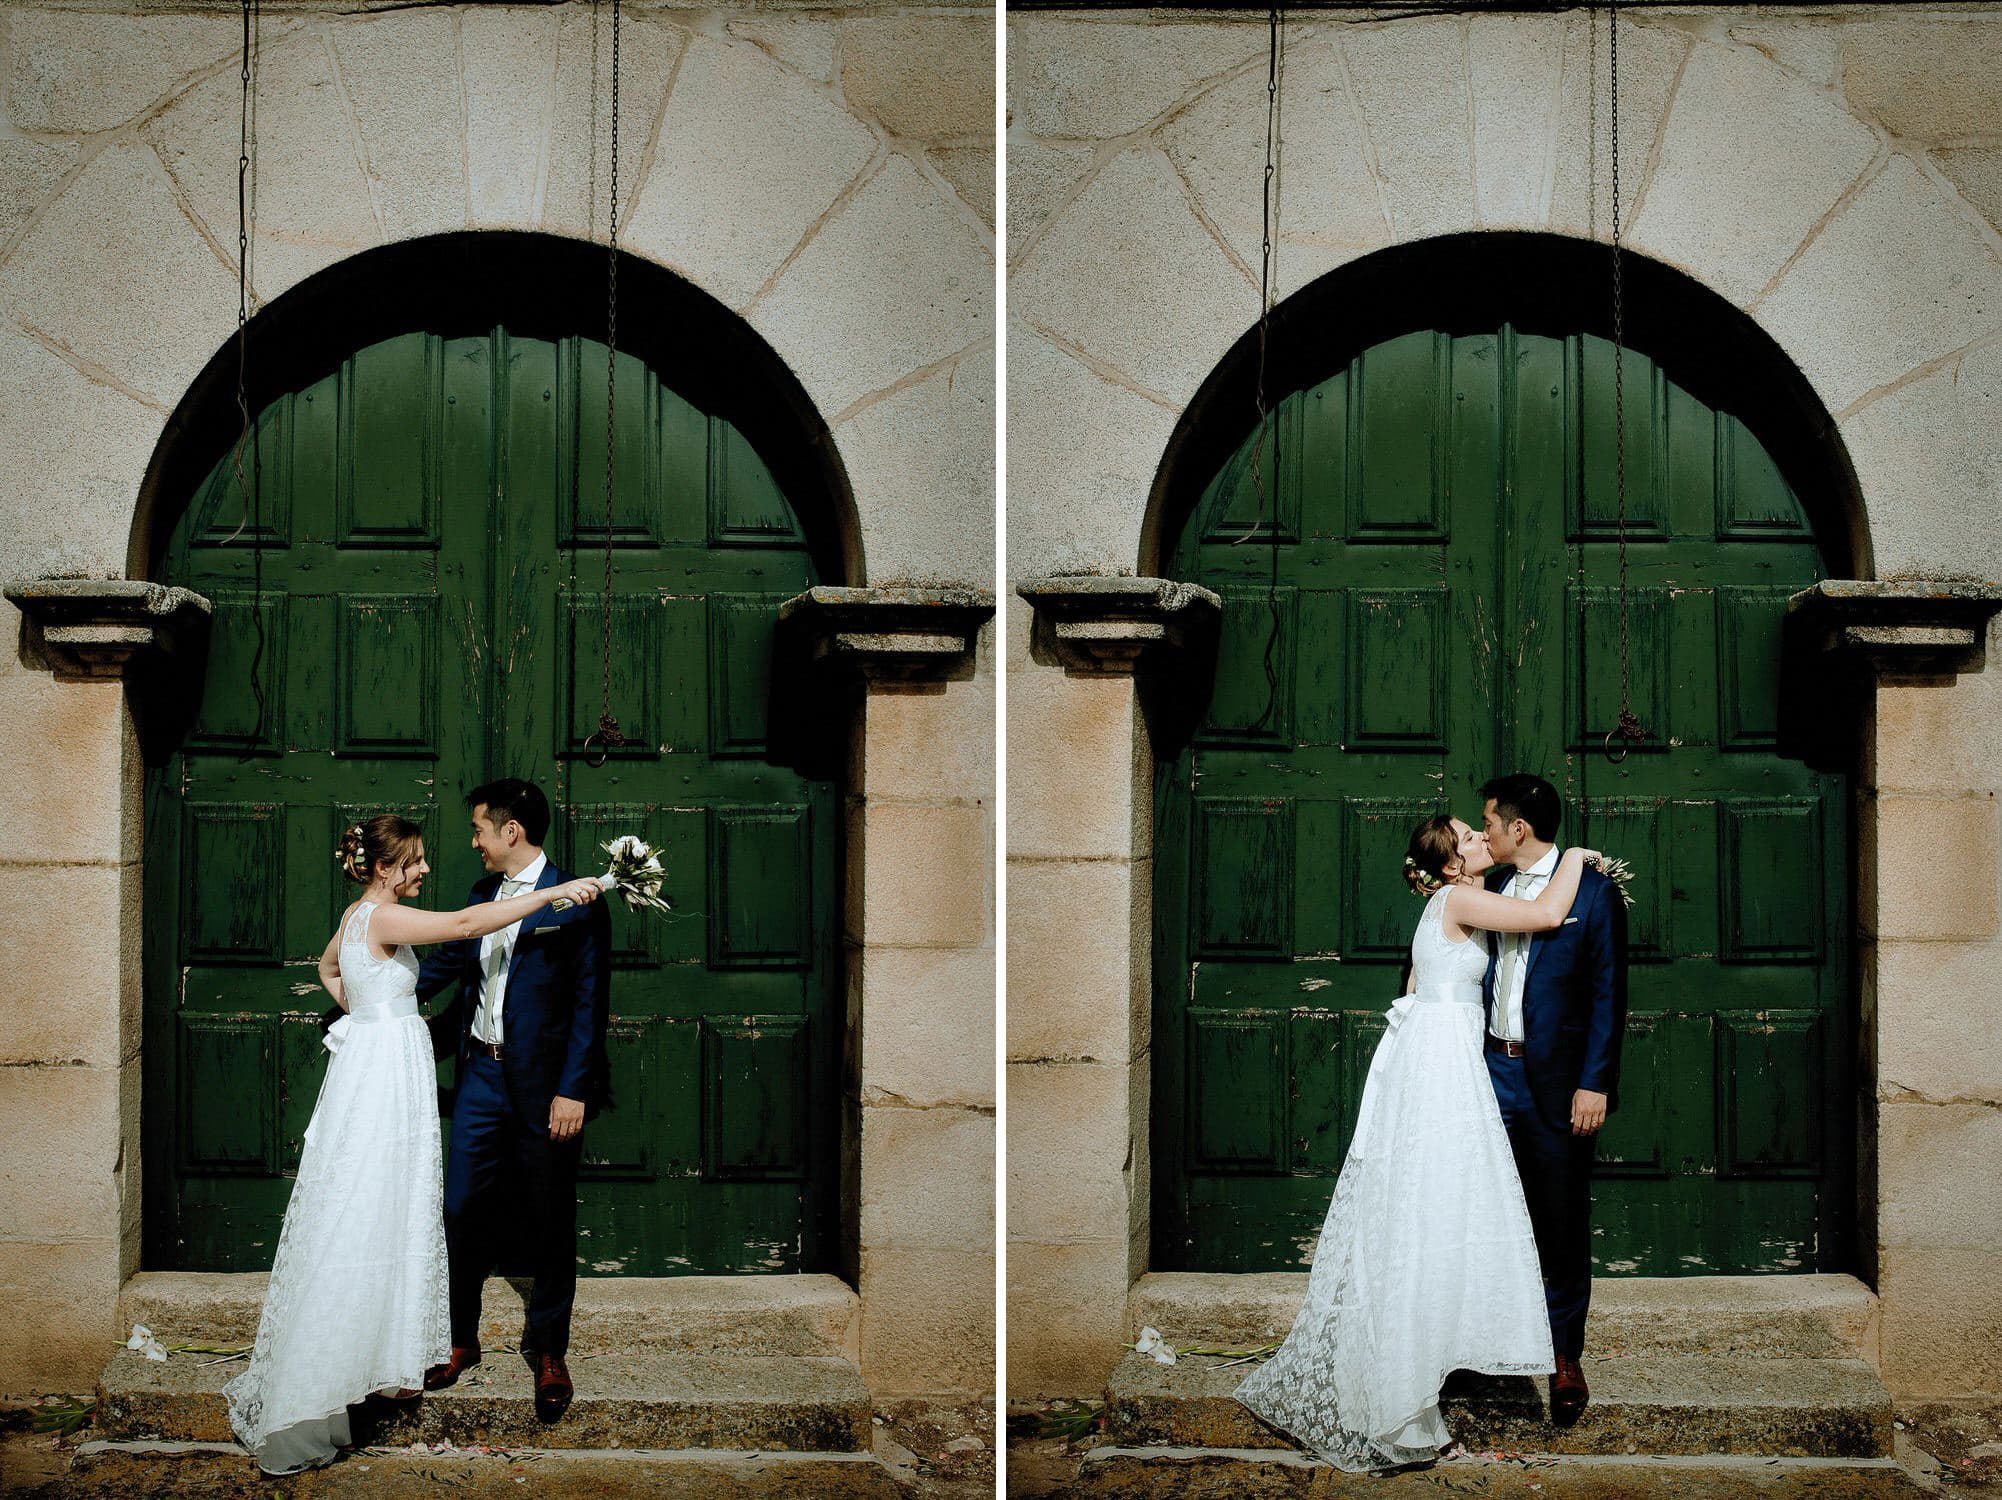 Charming Destination Wedding in the Portuguese Countryside - bride and groom sharing a kiss on the doorsteps of the church